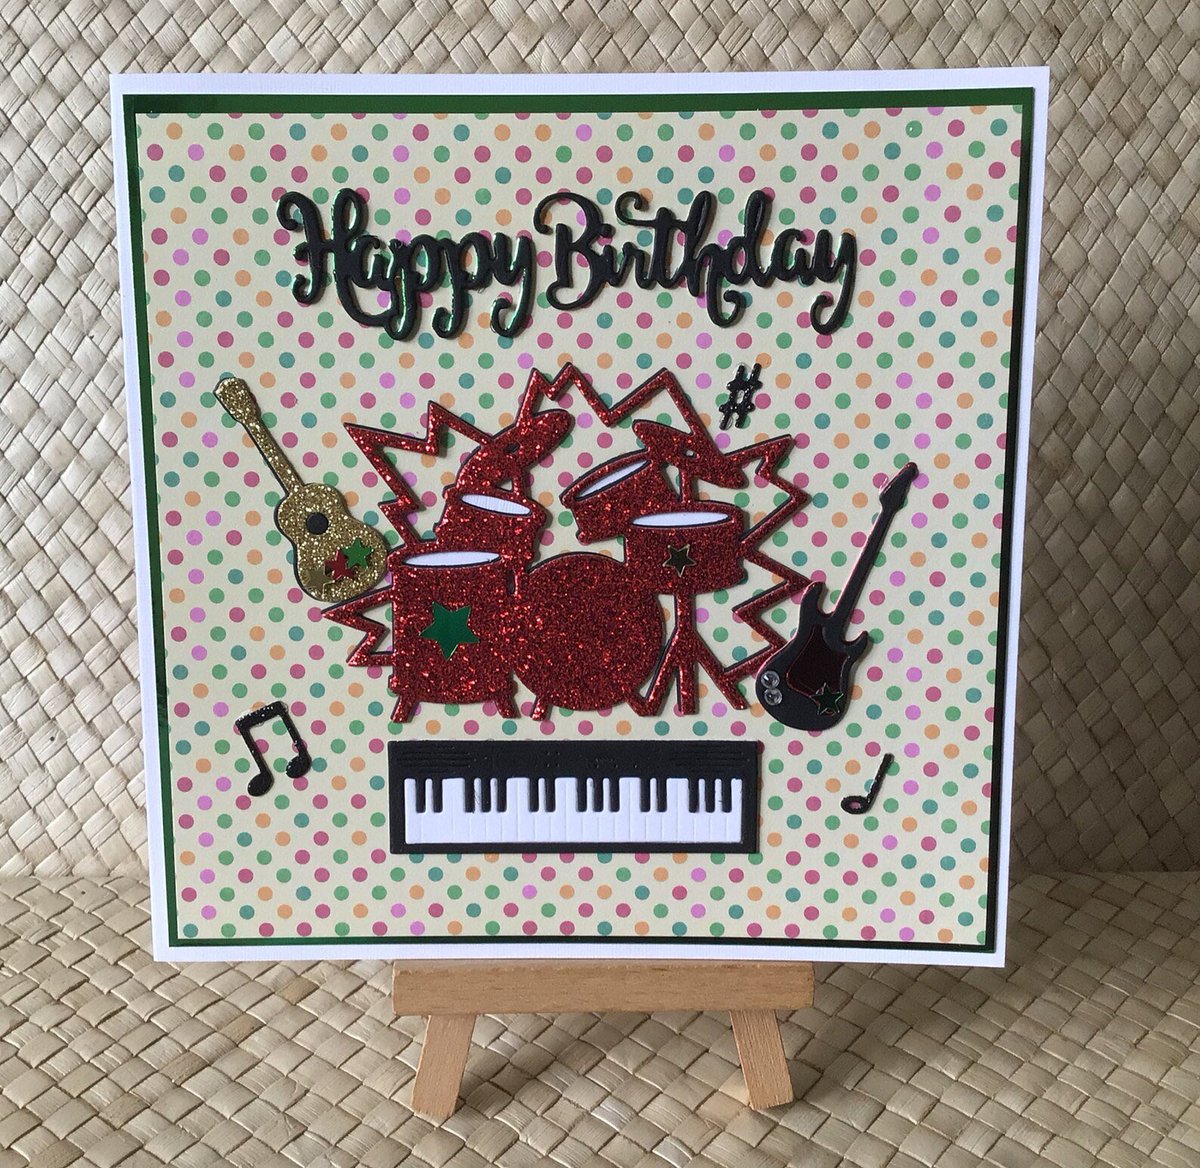 Personalised cards for young musicians 🎵

Guitarist Birthday Card, Acoustic Guitar Greeting Card for son, dad, daughter, friend etsy.me/3JqPzll 
#UKGiftHour #shopindie #youngmusicians #rockandroll #shopsmalluk